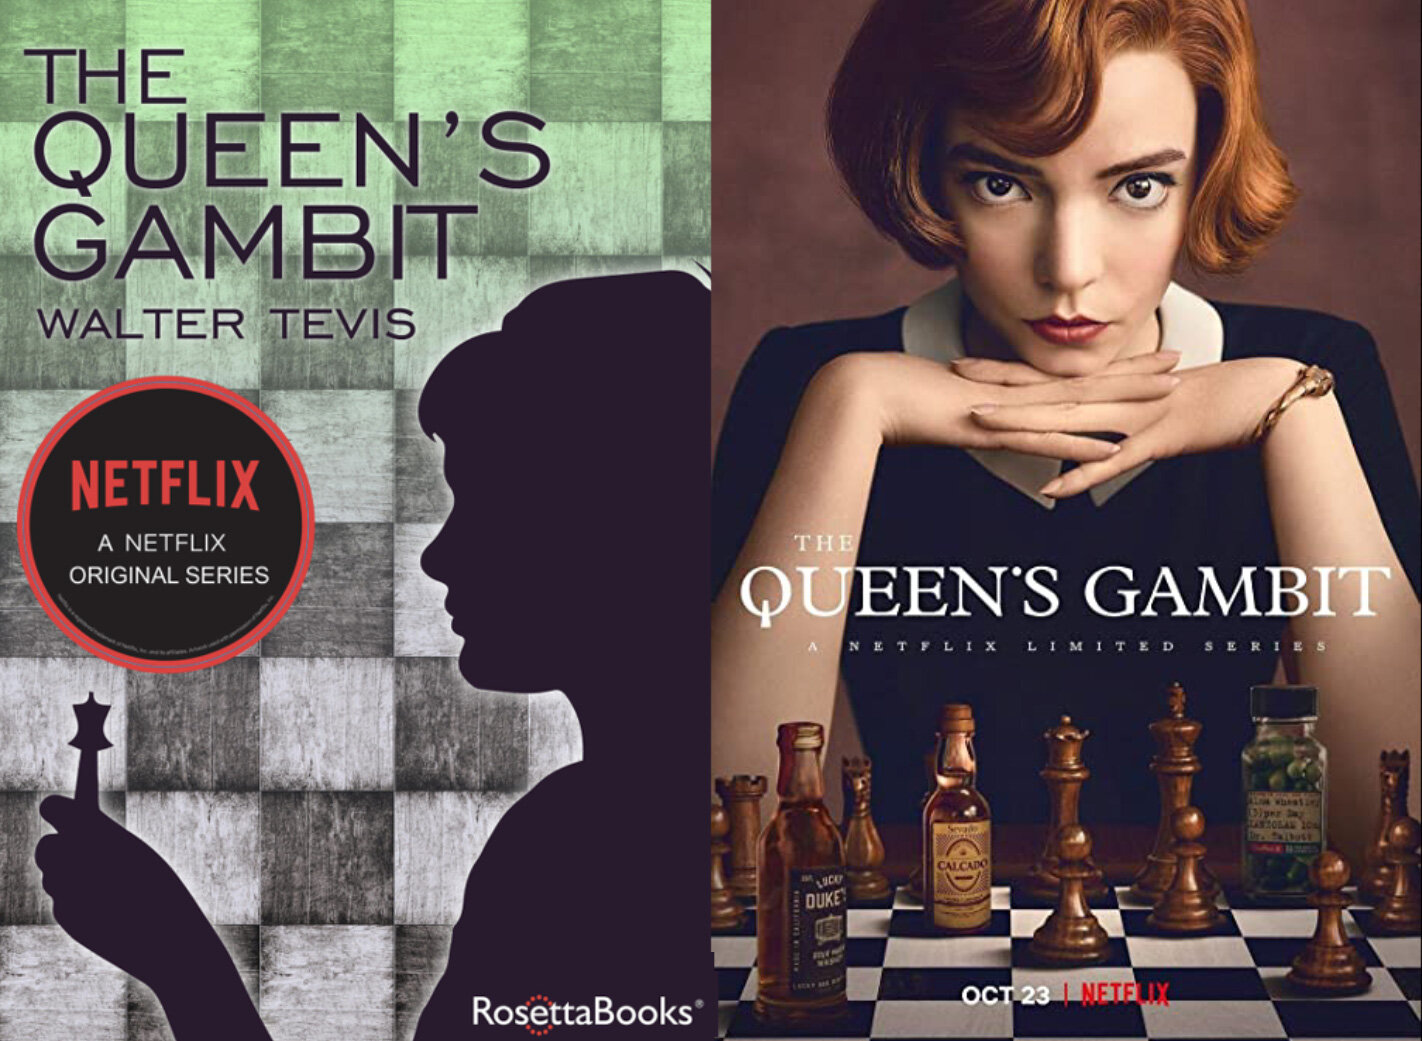 The Queen's Gambit - A Complete Guide